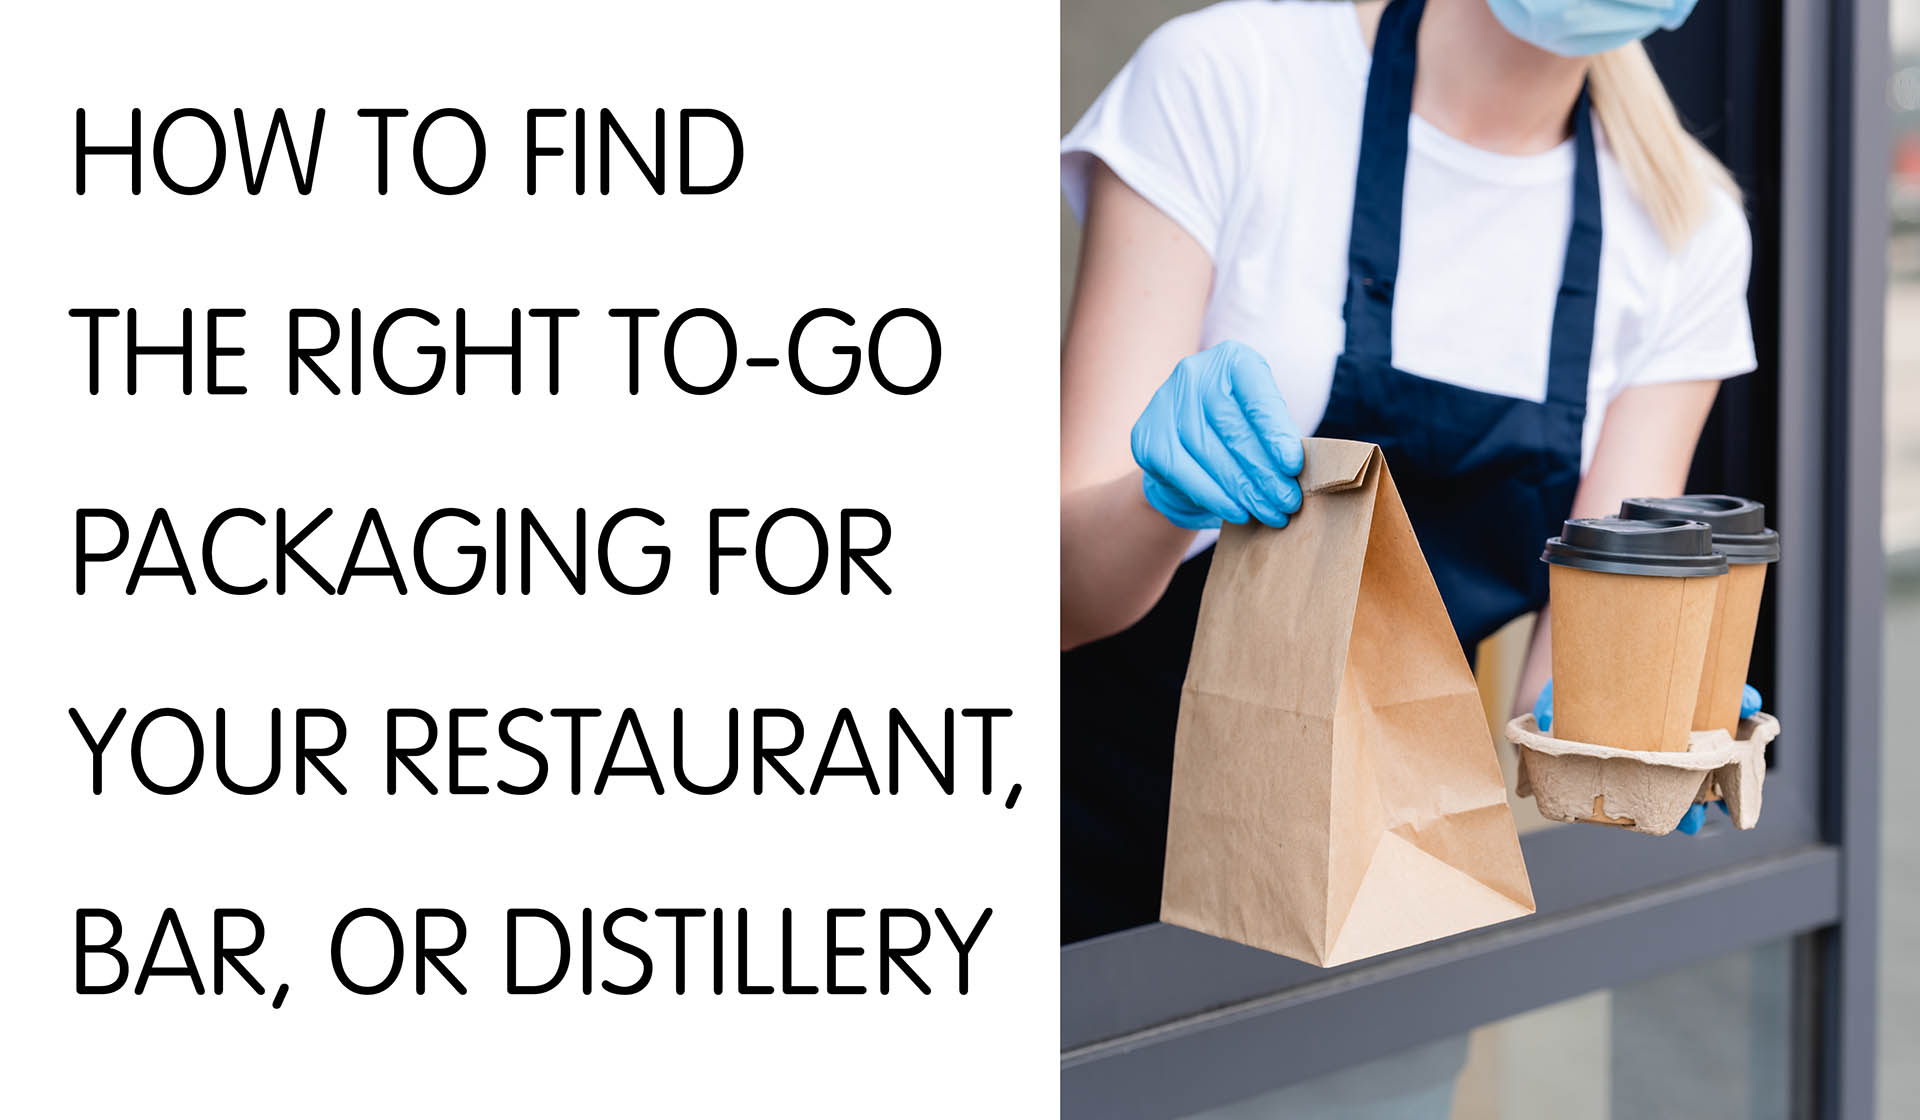 How to Find the Right To-Go Packaging For Your Restaurant, Bar, or Distillery